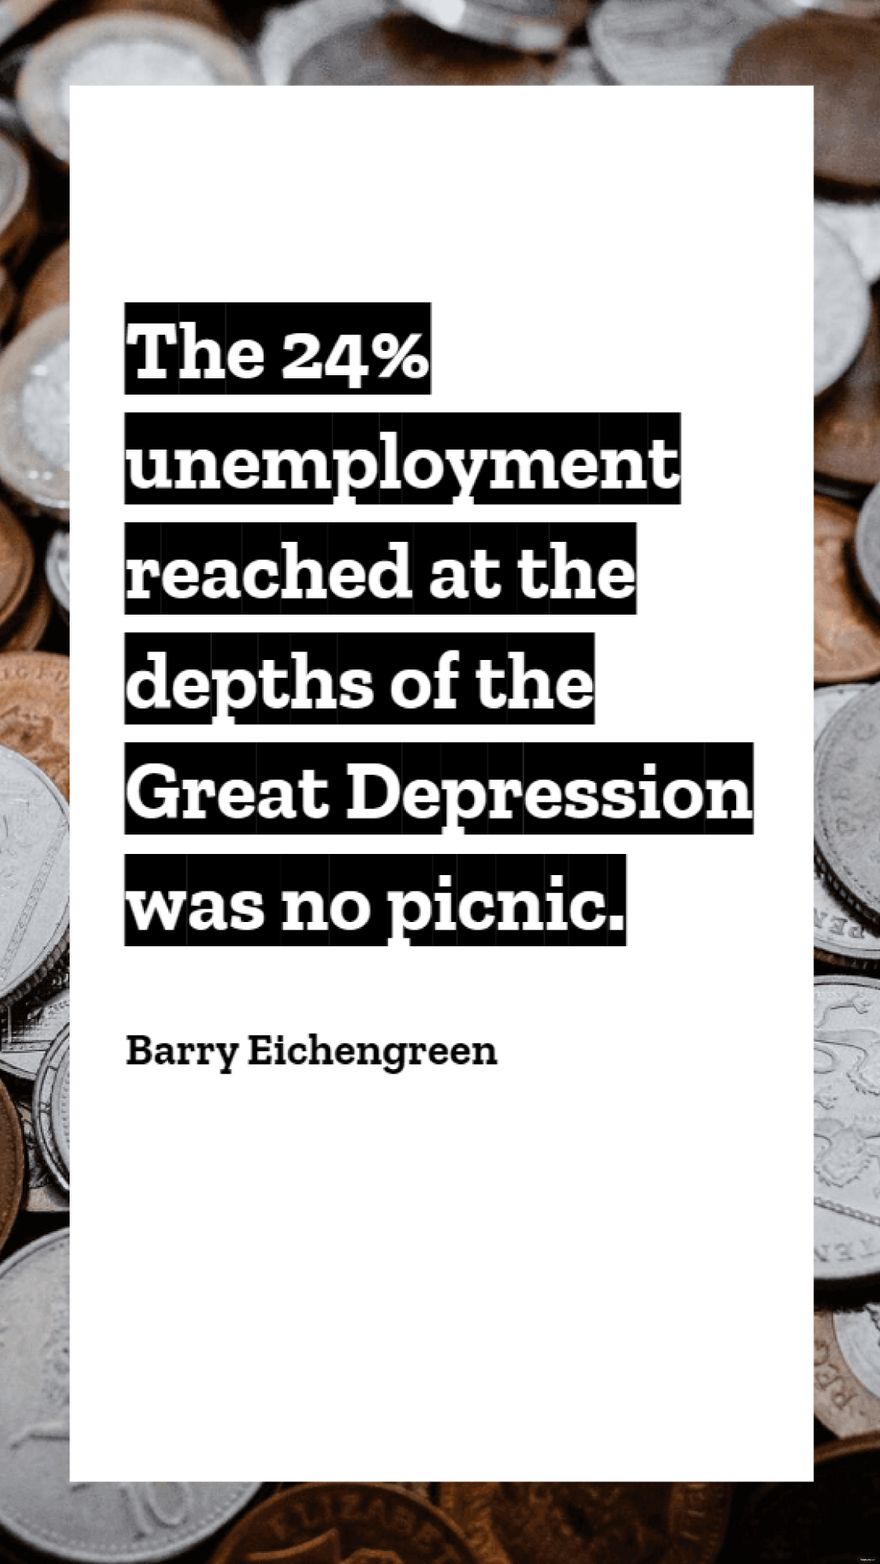 Barry Eichengreen - The 24% unemployment reached at the depths of the Great Depression was no picnic.